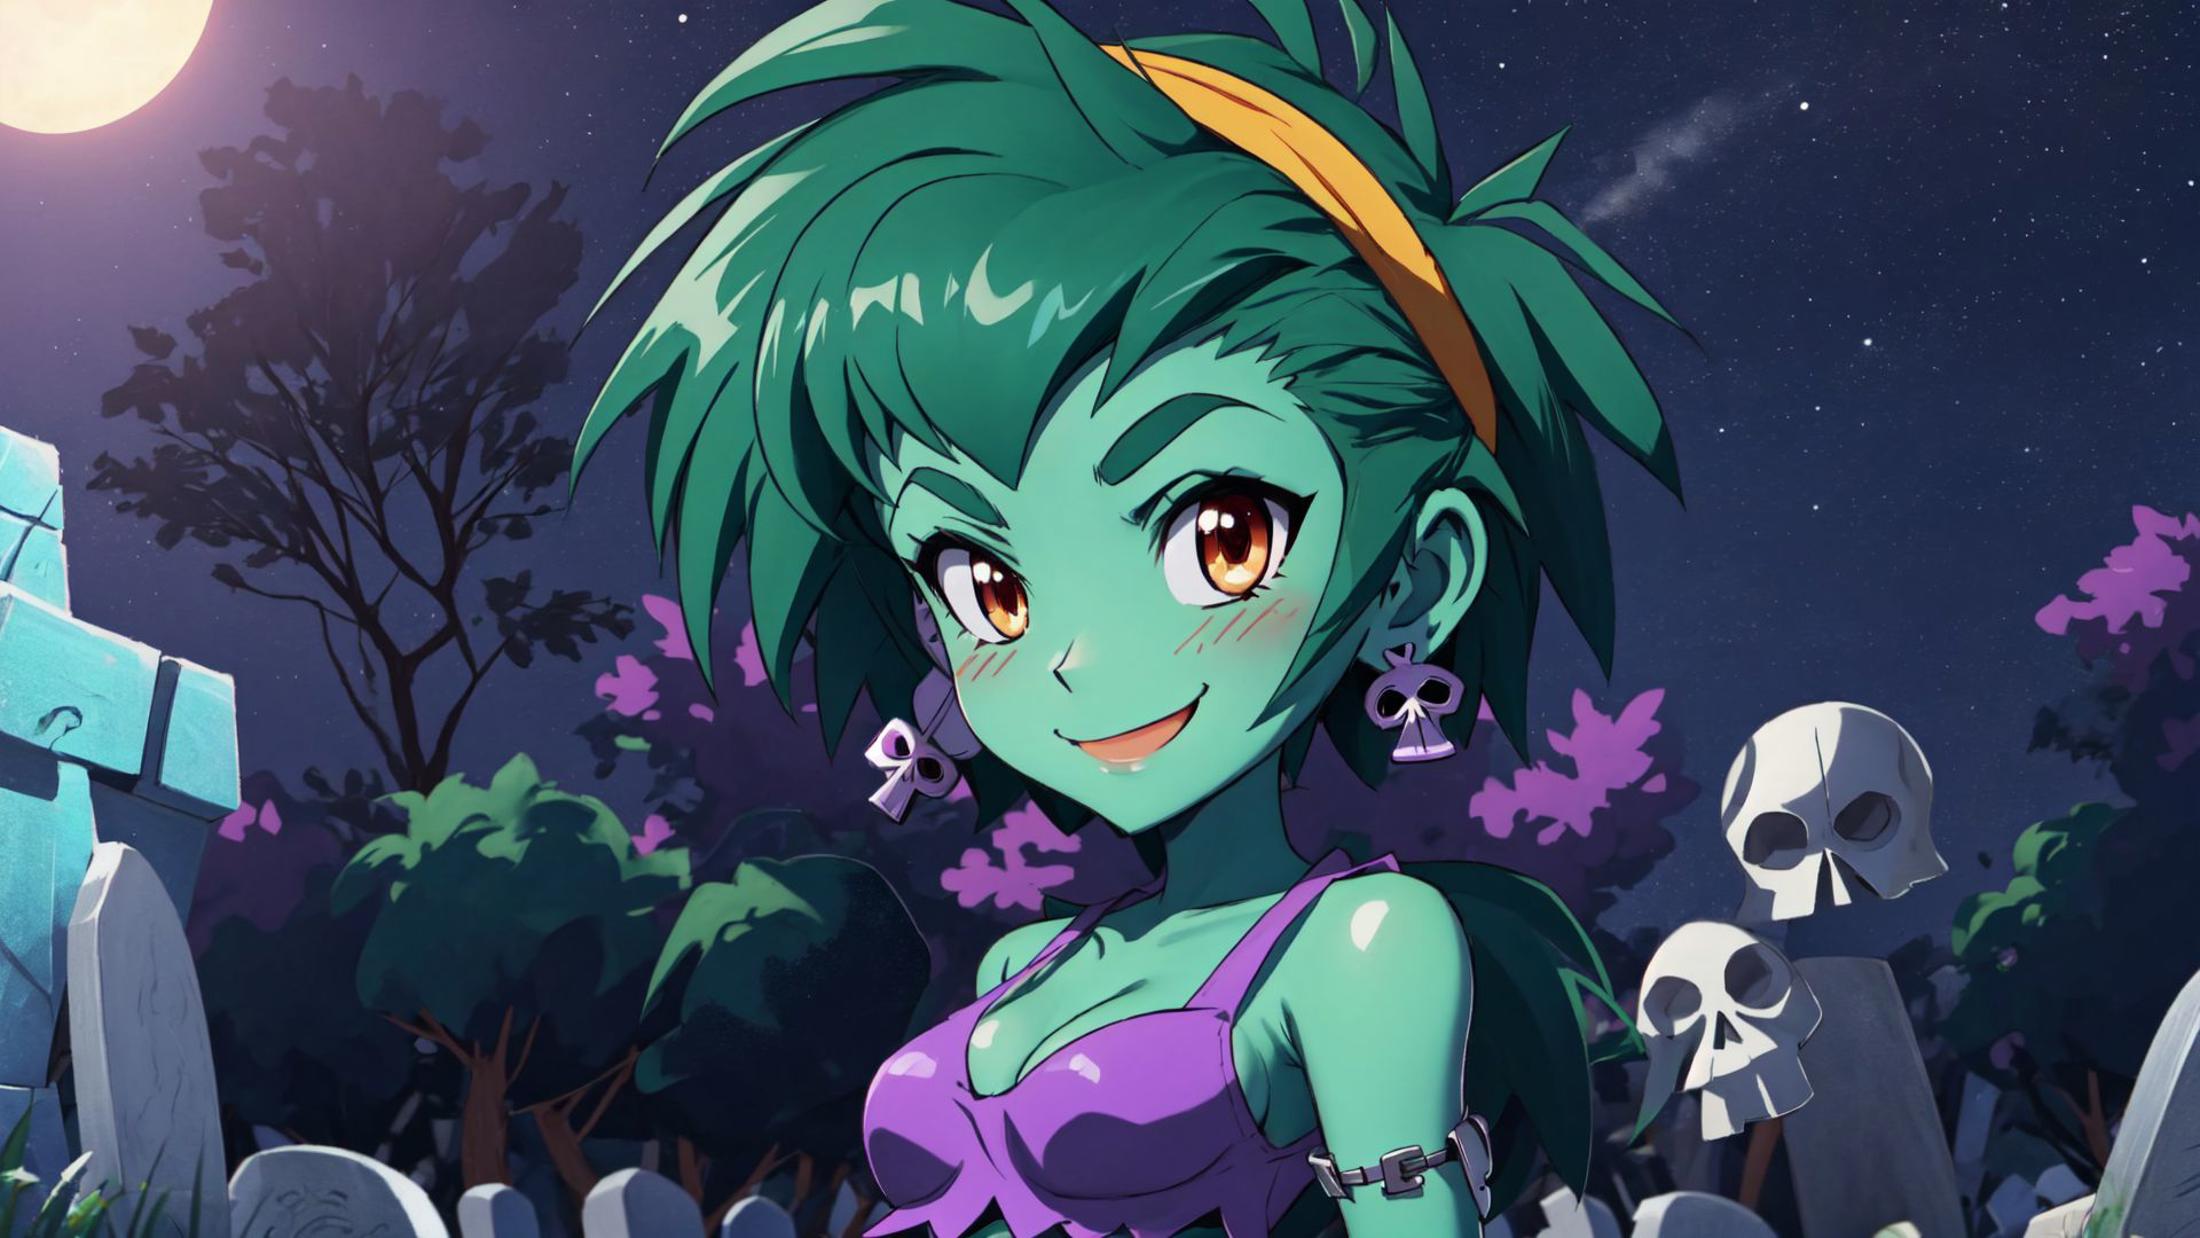 Rottytops (Shantae) LoRA image by marusame